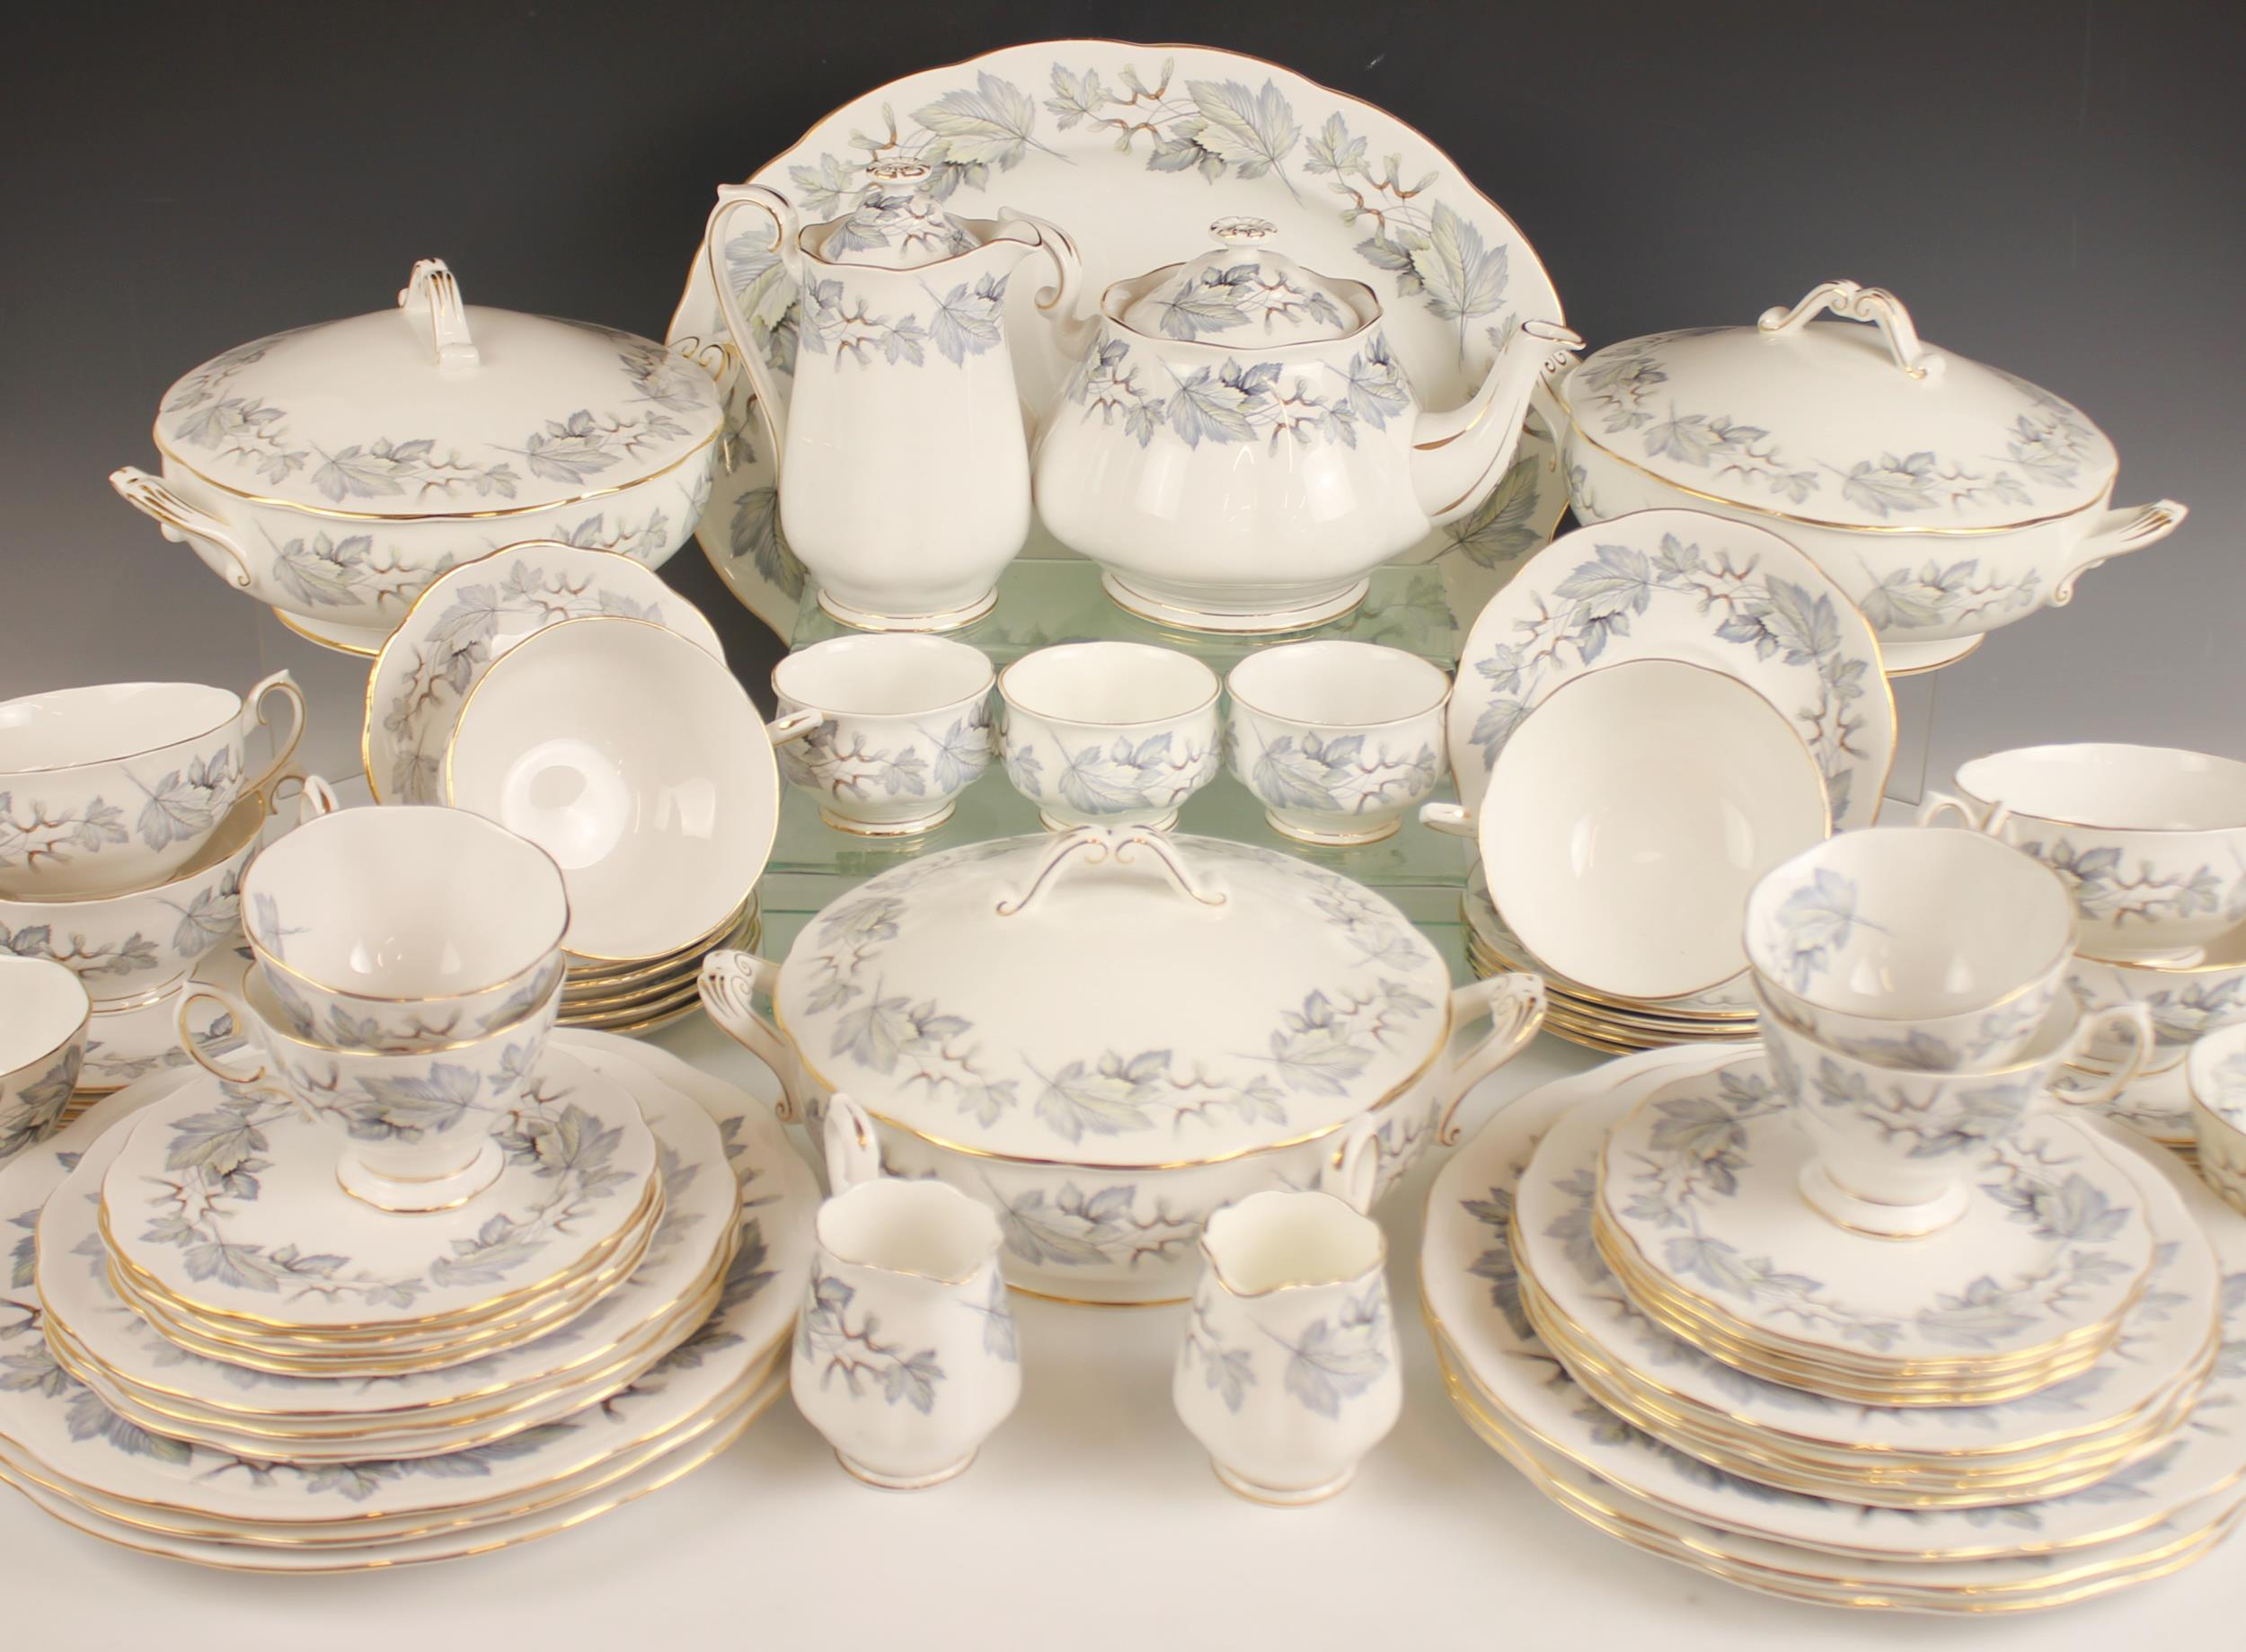 A Royal Albert part dinner service in the "Silver Maple" pattern, comprising: six soup bowls and